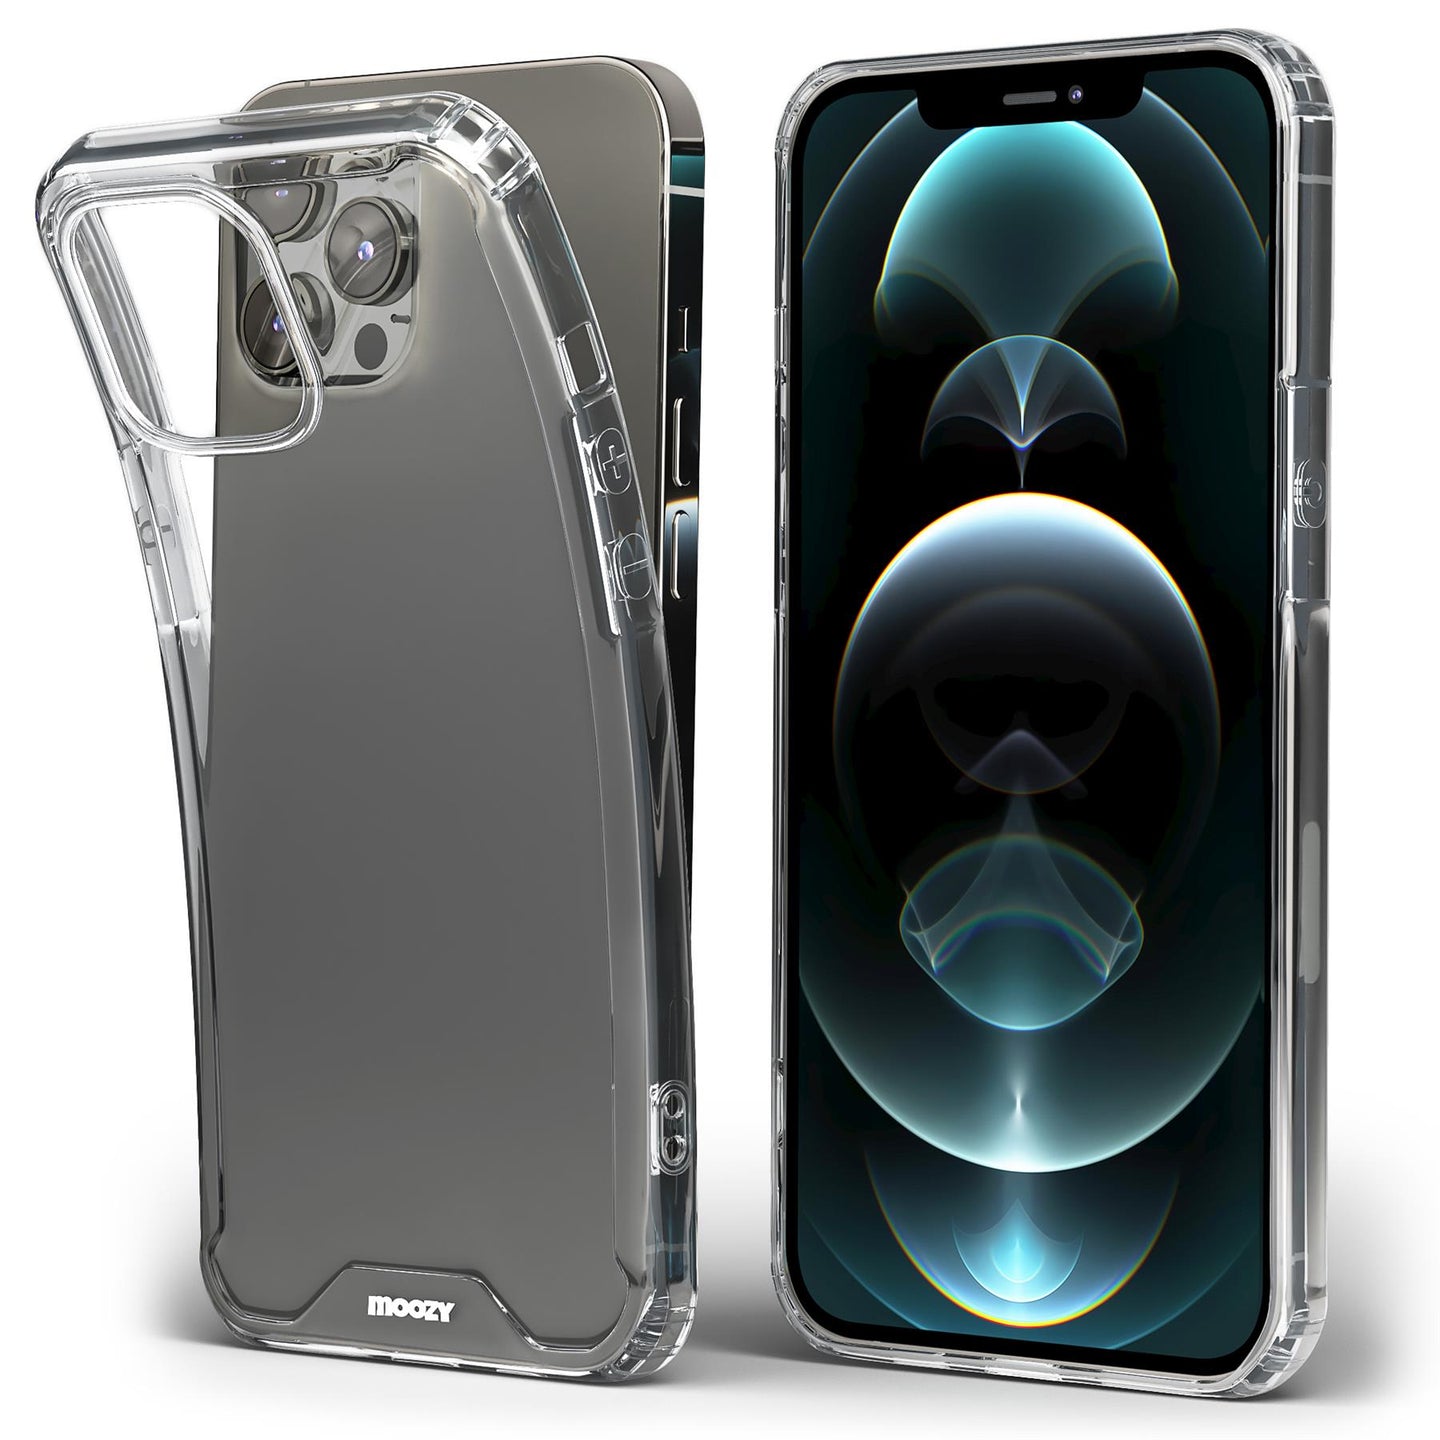 Moozy Xframe Shockproof Case for iPhone 12, iPhone 12 Pro - Transparent Rim Case, Double Colour Clear Hybrid Cover with Shock Absorbing TPU Rim